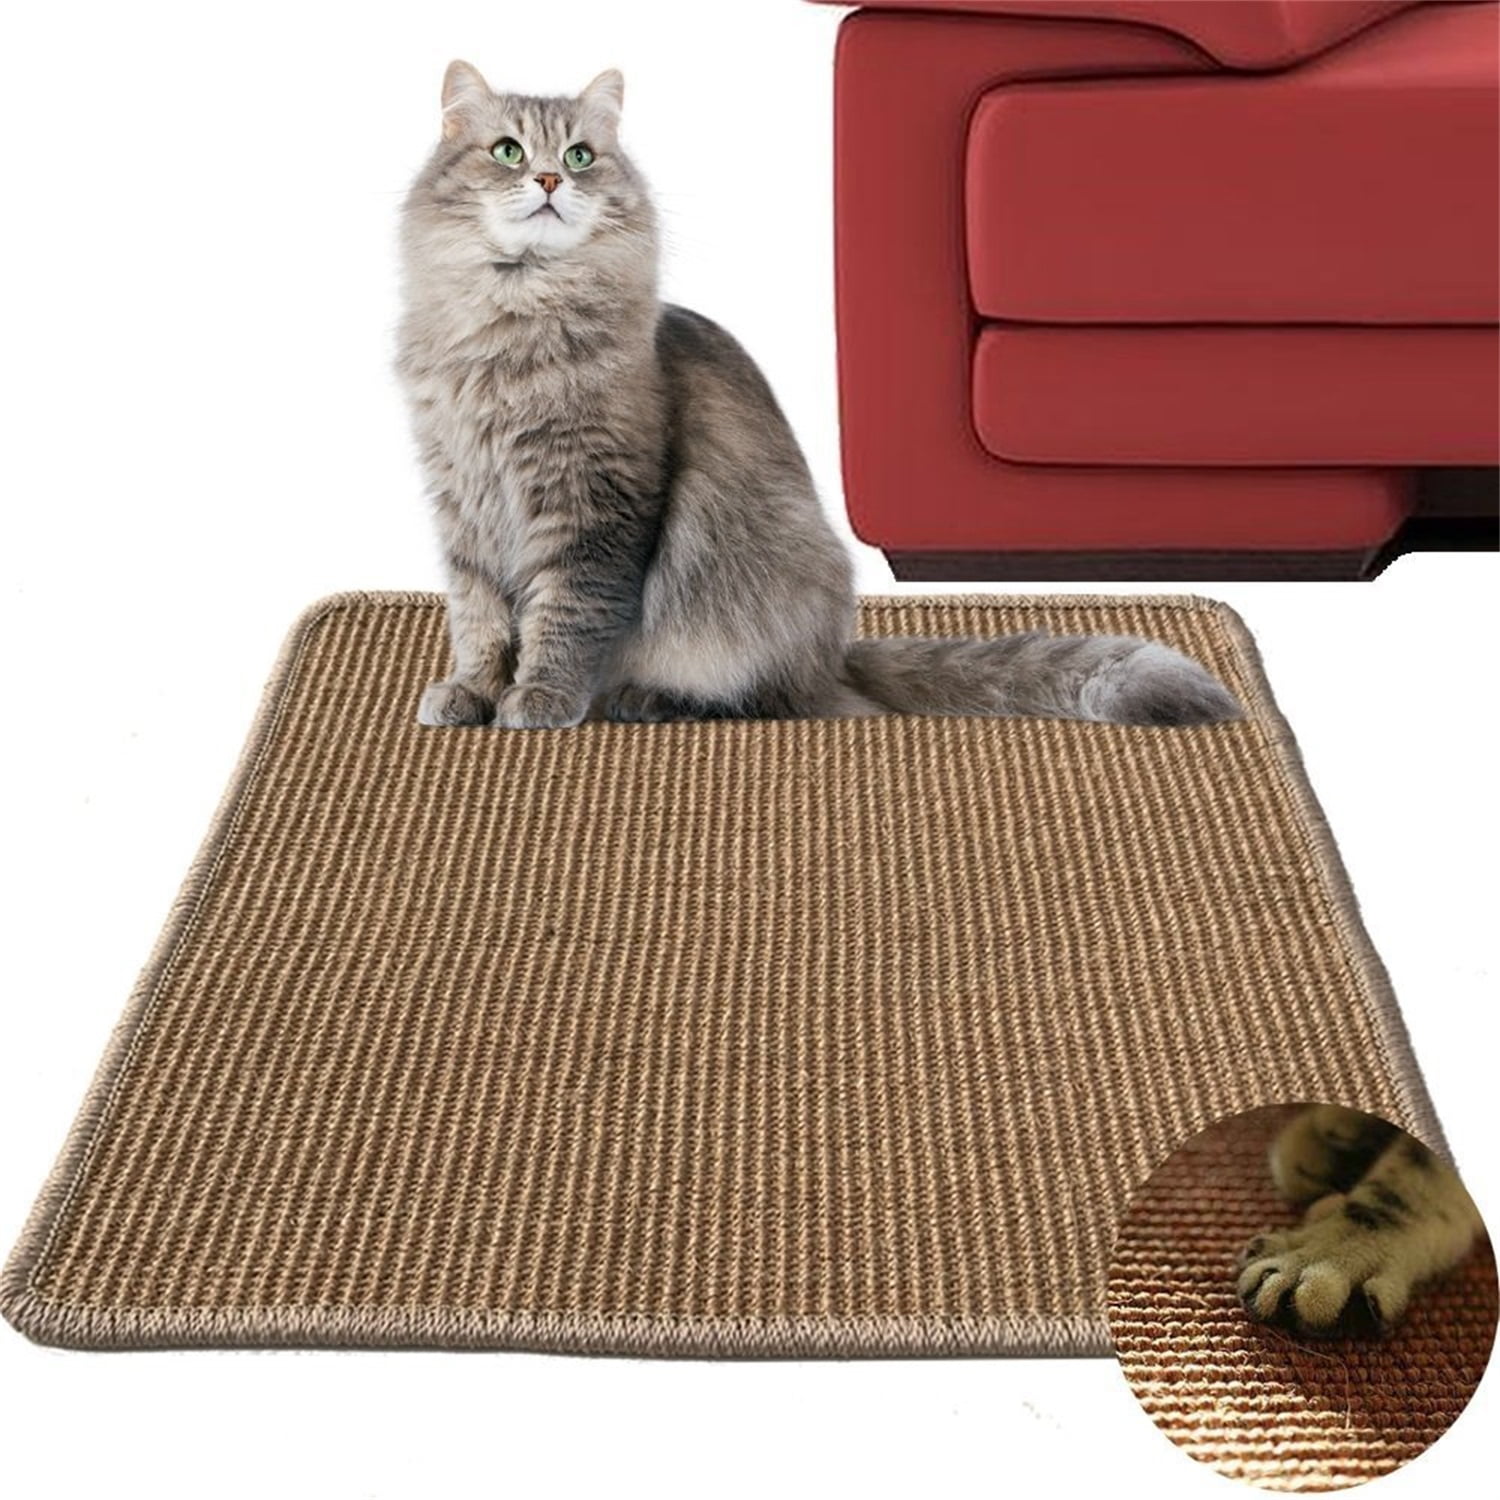 NOZOMI Cat Scratch Mat Protection Play Pad,Sleeping Pad and Protects Furniture Suit for Large Medium Small Cat 40 * 60cm/16 * 24 inch Natural Sisal Anti-Slip Cat Scratching Mat brown